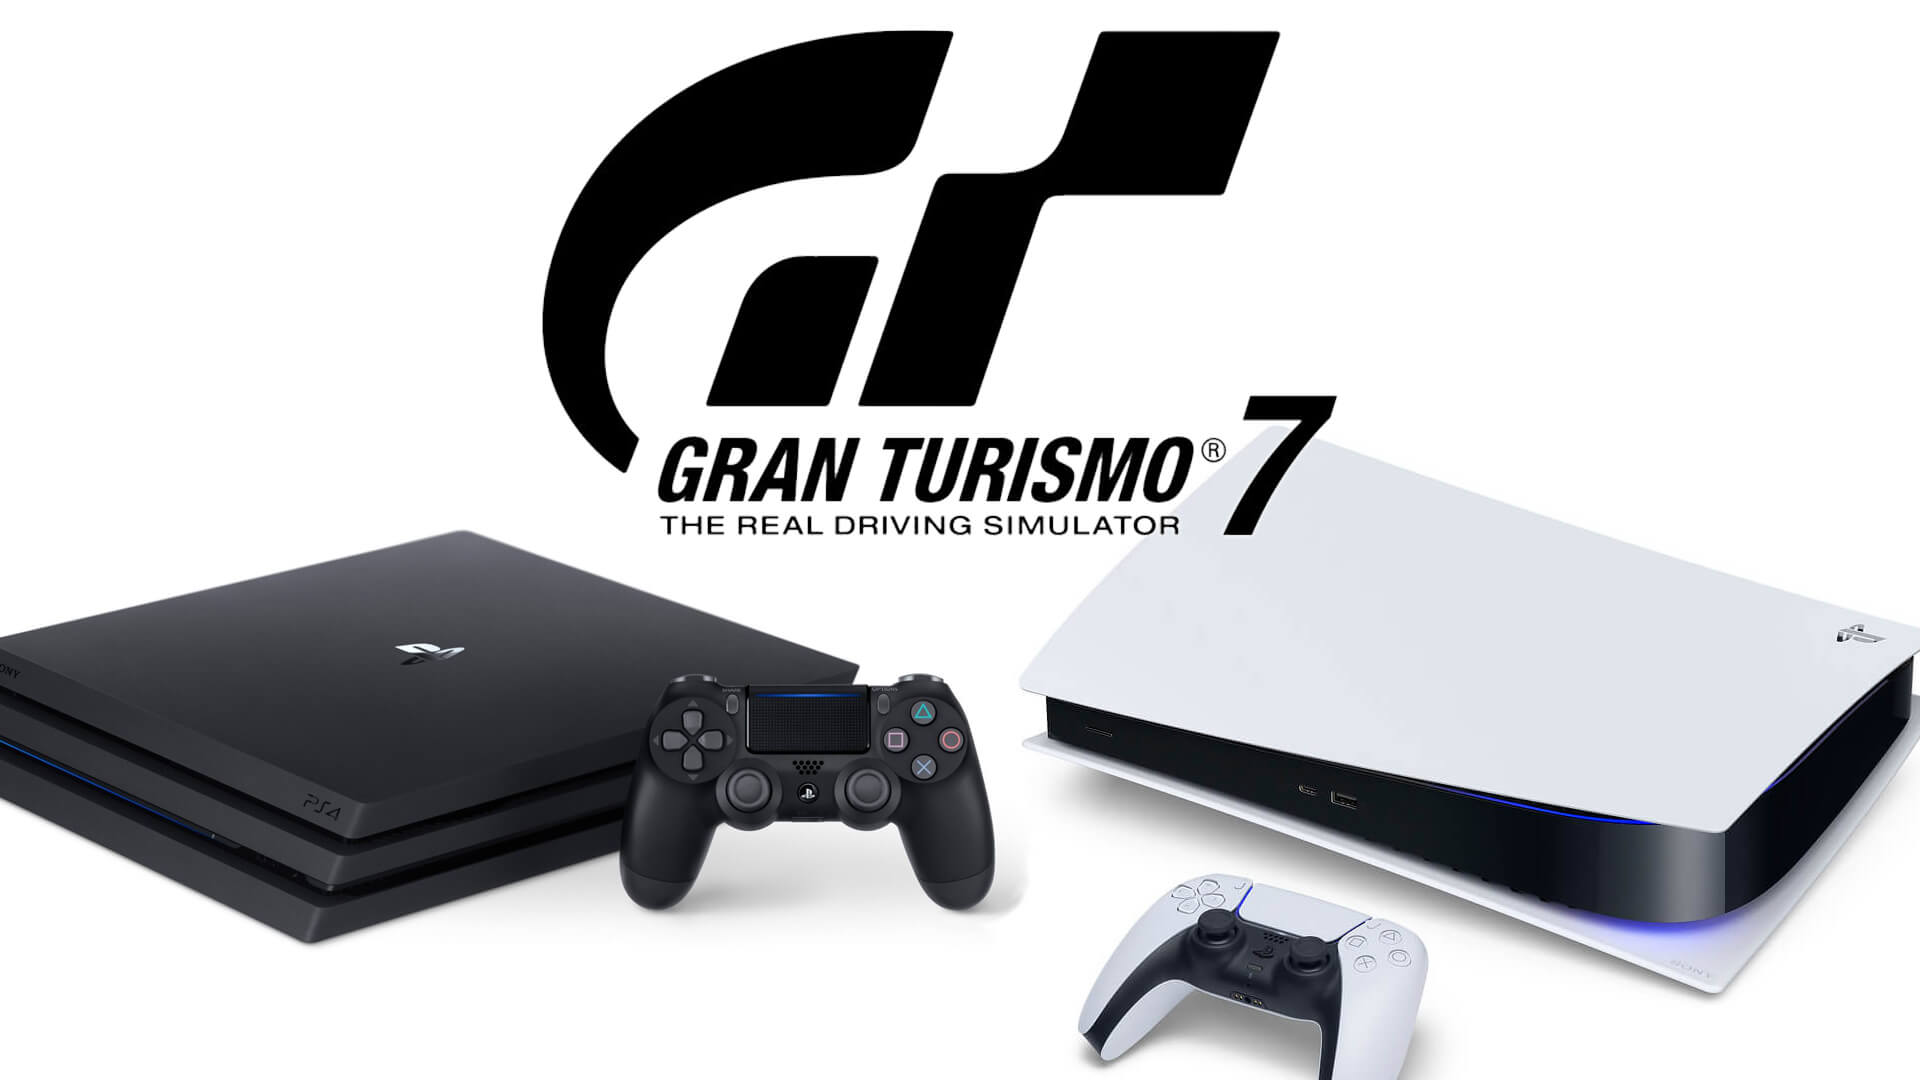 https://www.gtplanet.net/wp-content/uploads/2021/06/gt7-ps4-and-ps5-20210602.jpg